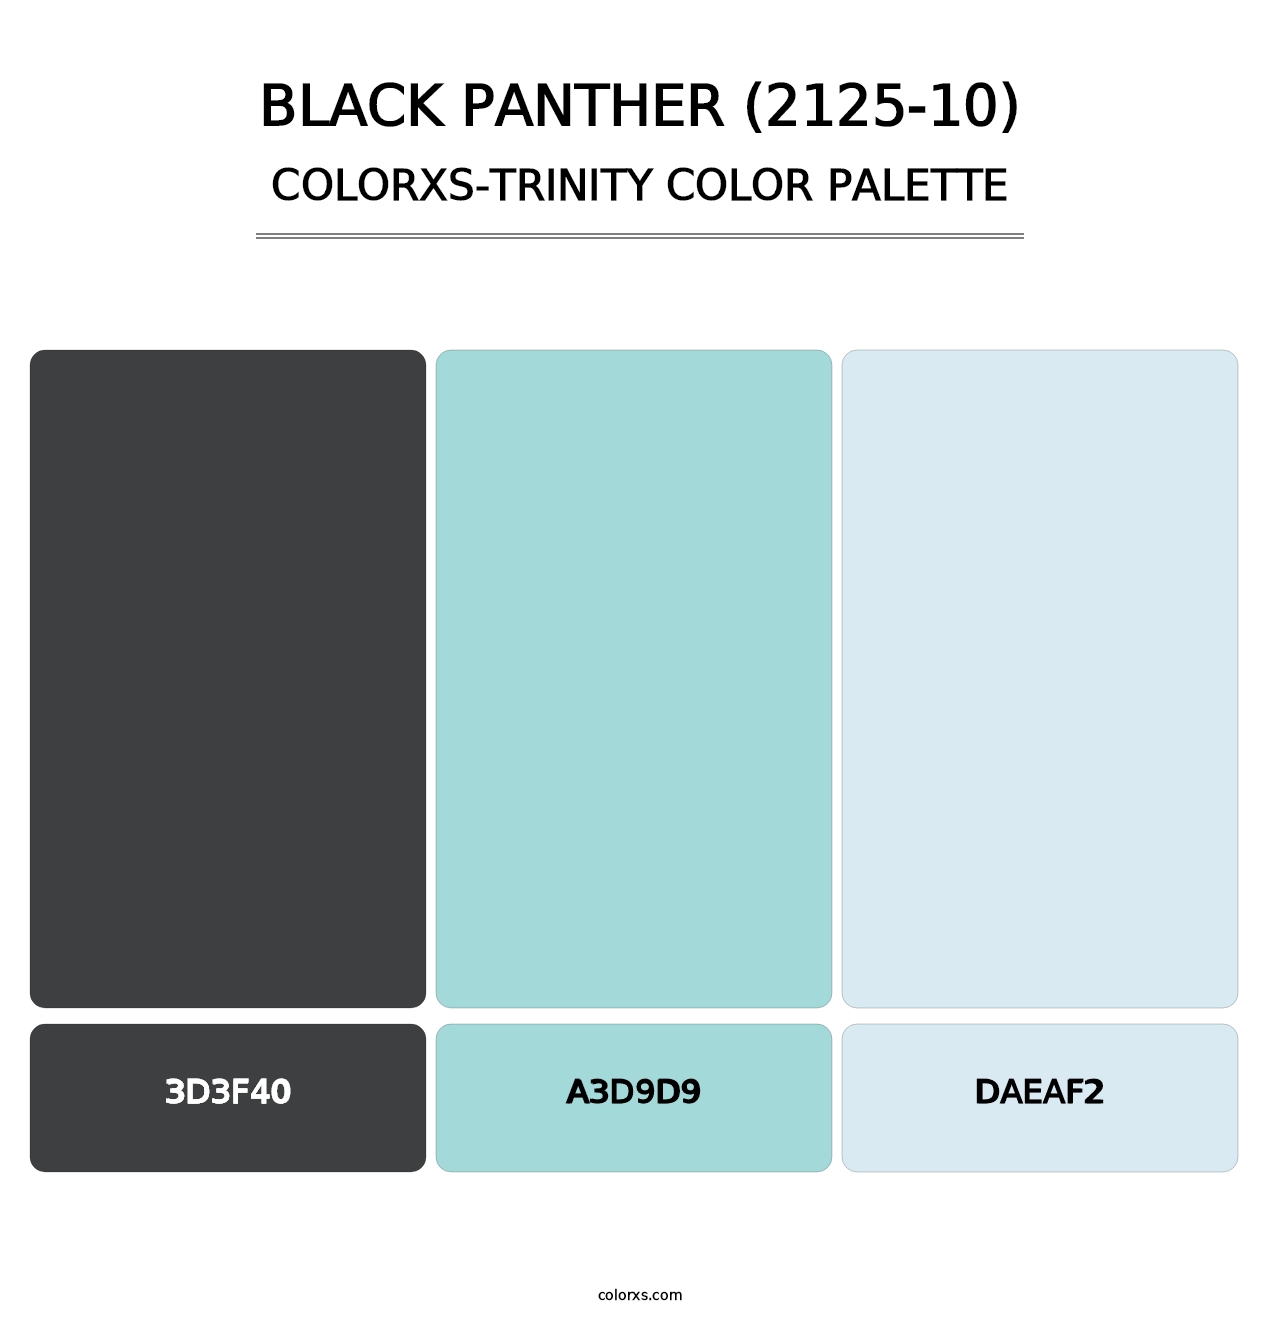 Black Panther (2125-10) - Colorxs Trinity Palette